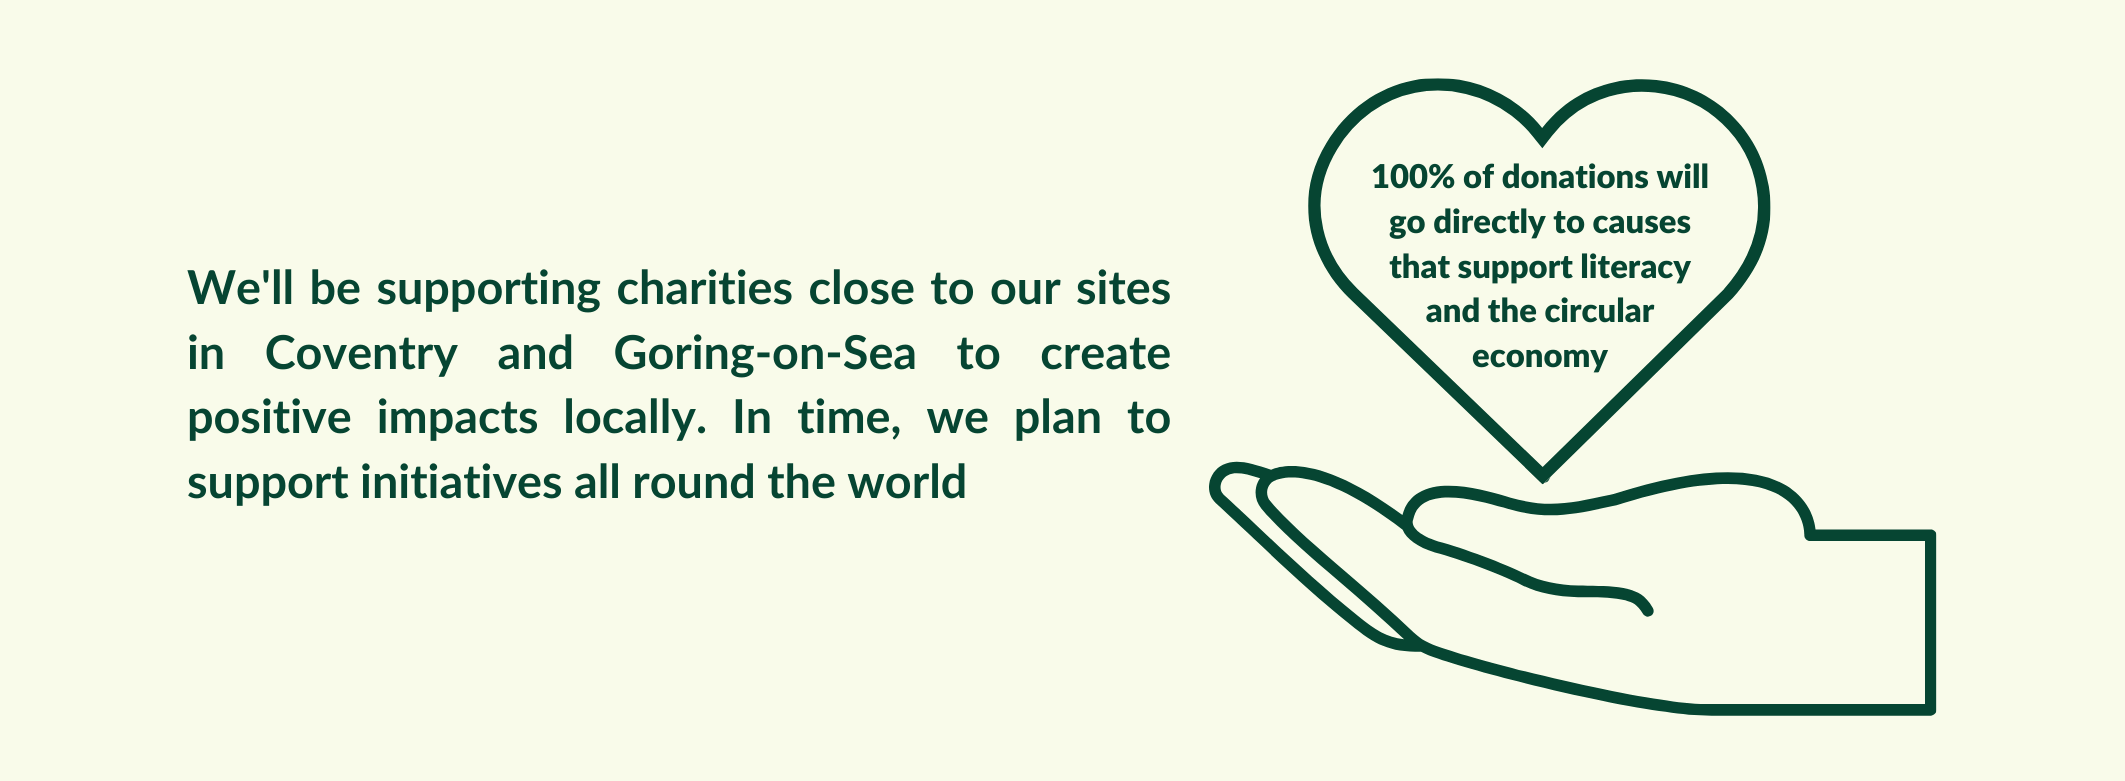 100% of donations raised by the charity will go directly to causes that support literacy and the circular economy.The Wob Foundation will support charities close to our sites in Coventry and Goring-on-Sea to create positive impacts locally. In time, we plan to support initiatives all around the world.